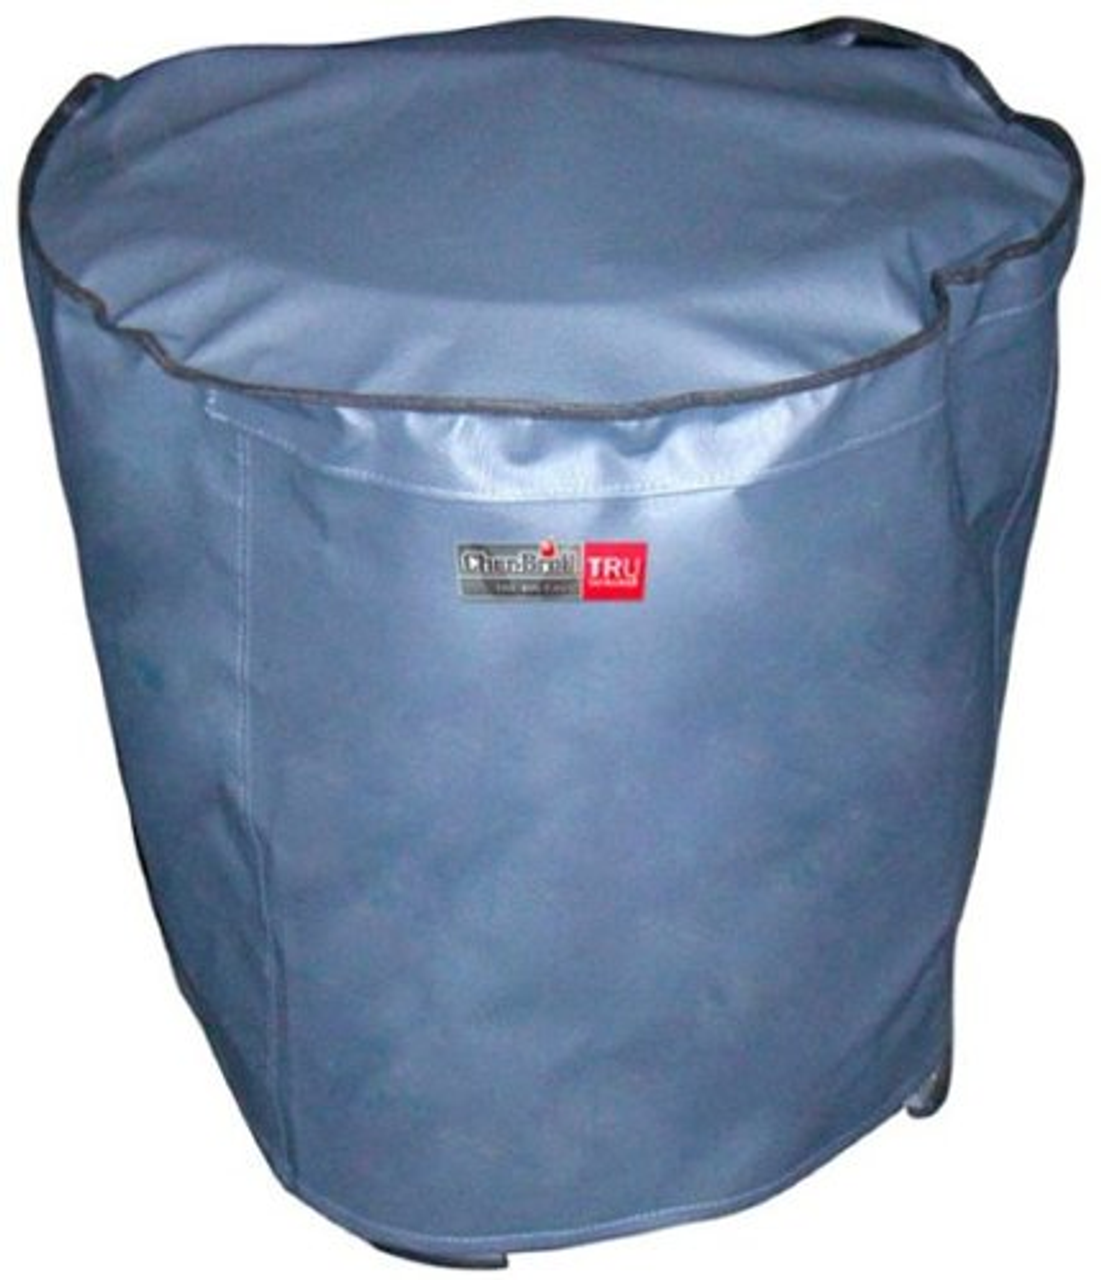 Char-Broil The Big Easy Oil-Less Fryer Cover - Black or Gray (May Vary)